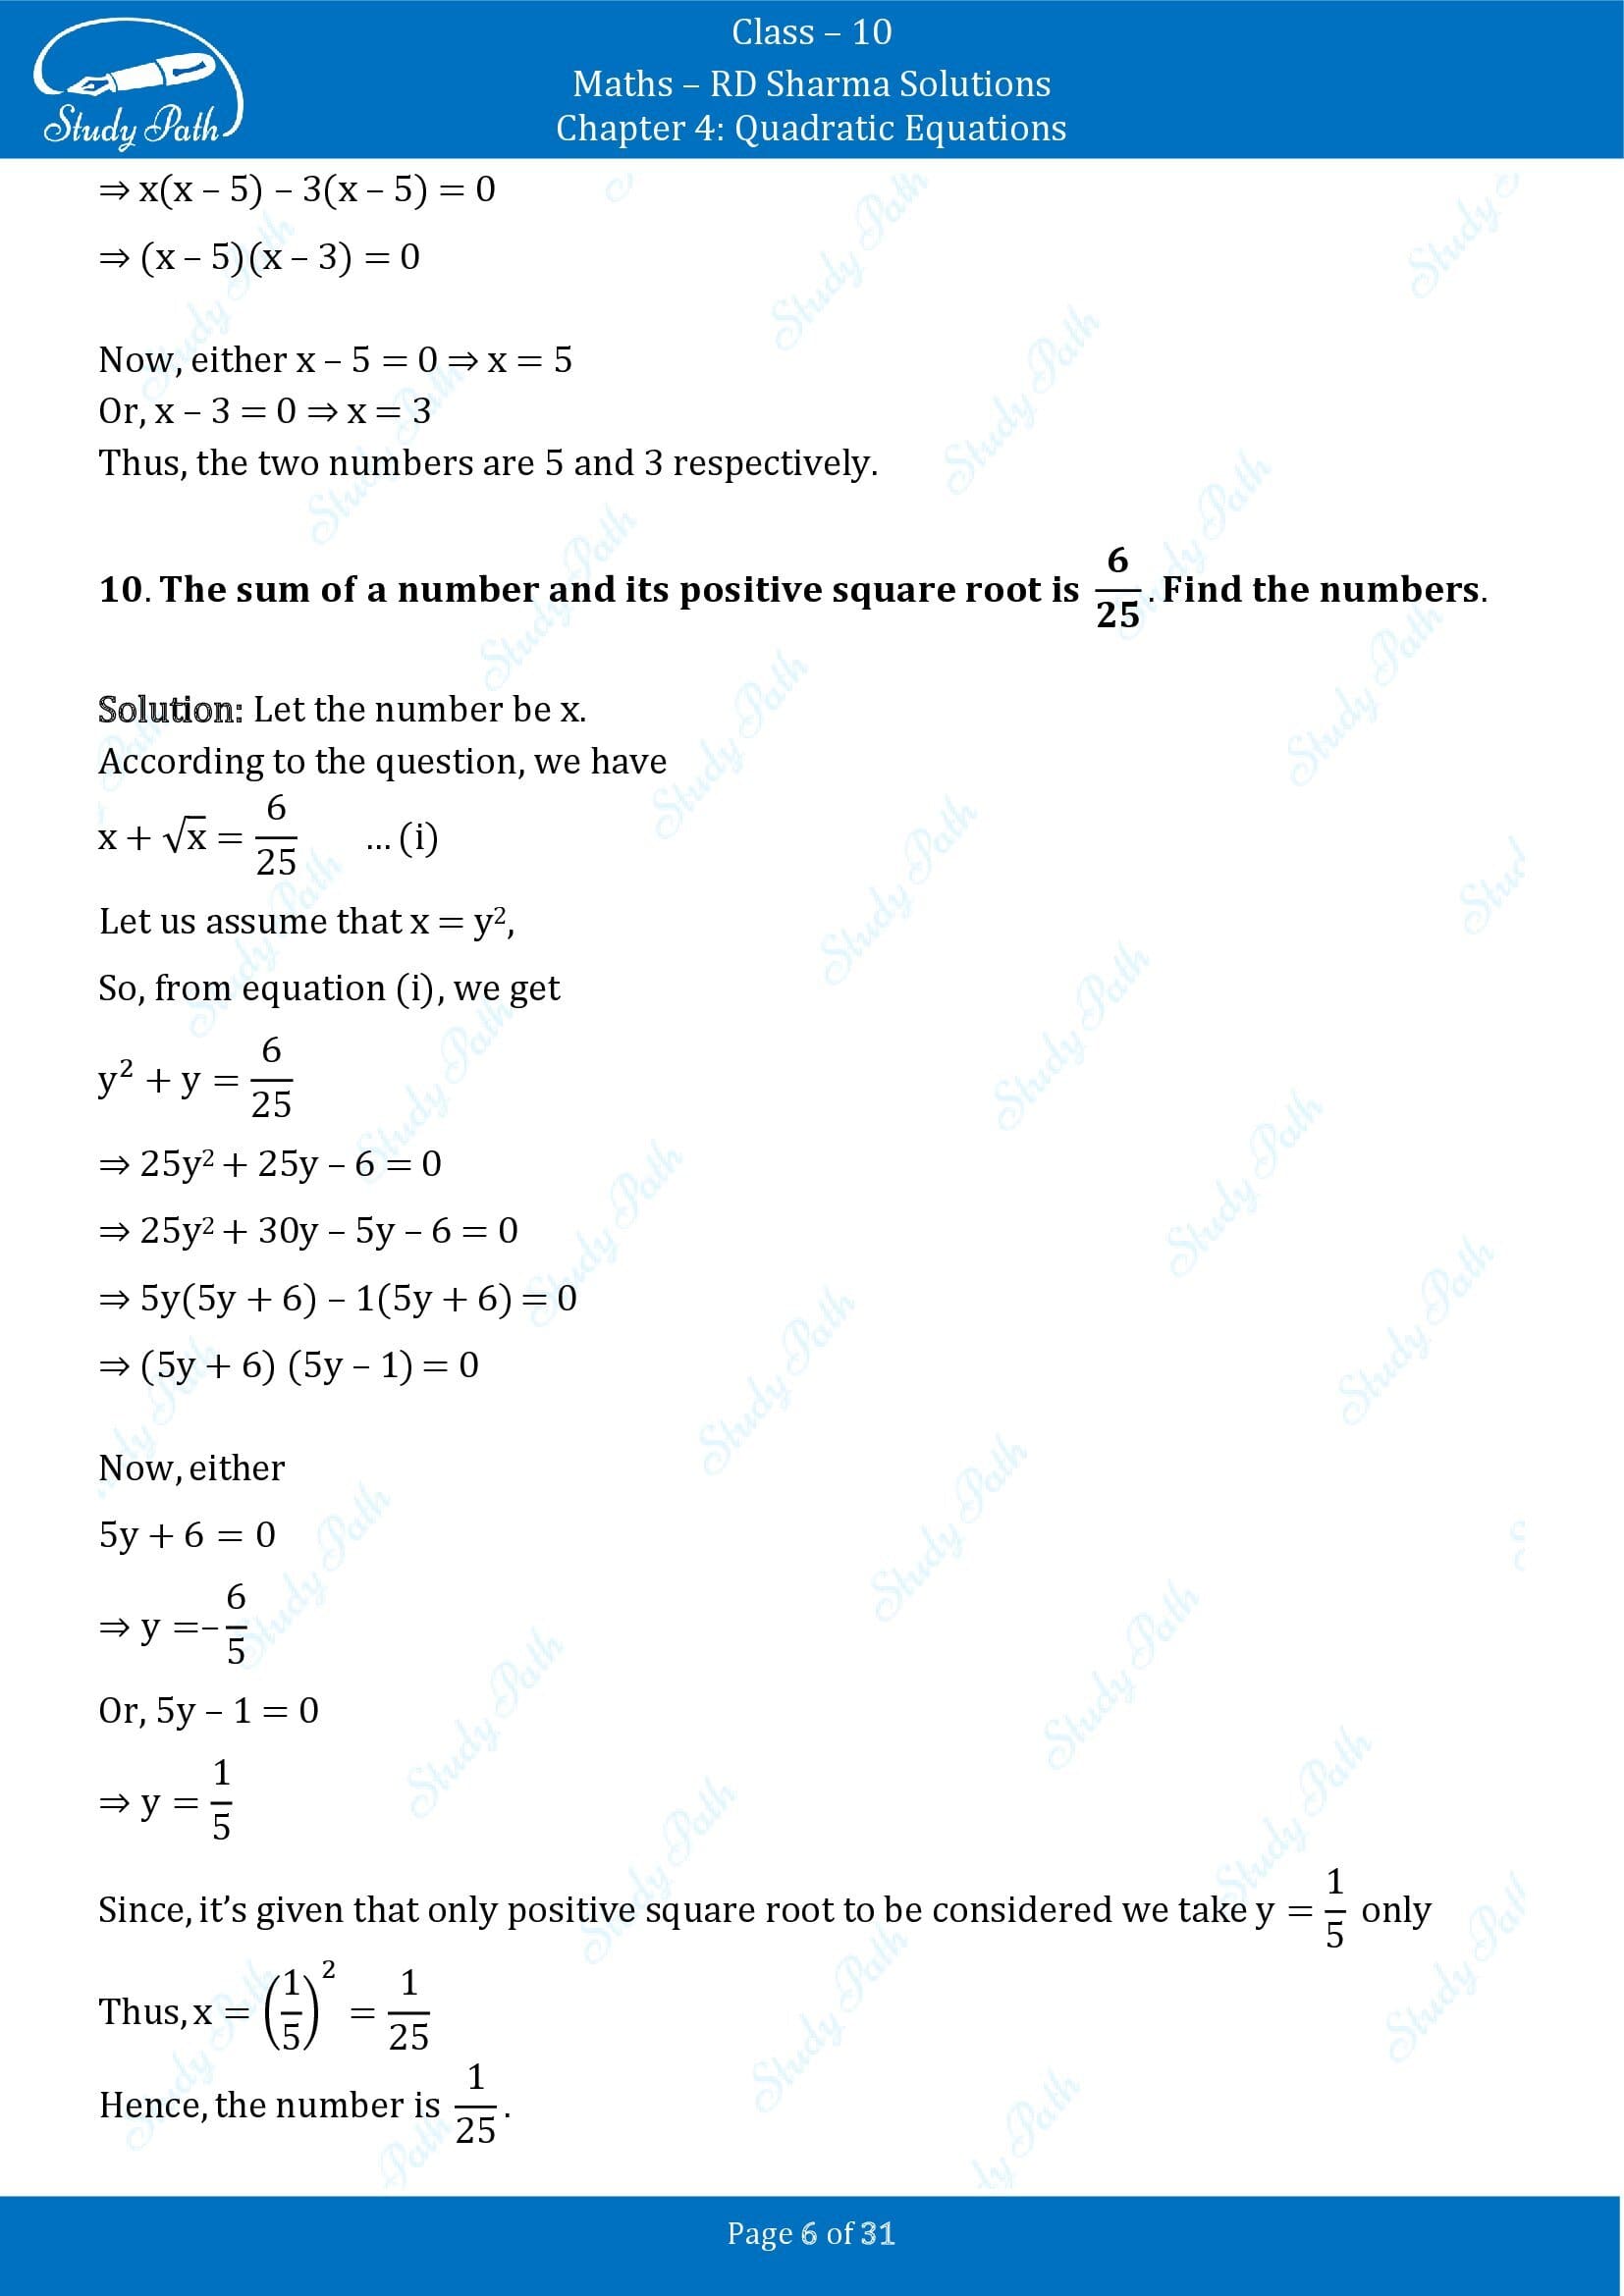 RD Sharma Solutions Class 10 Chapter 4 Quadratic Equations Exercise 4.7 00006